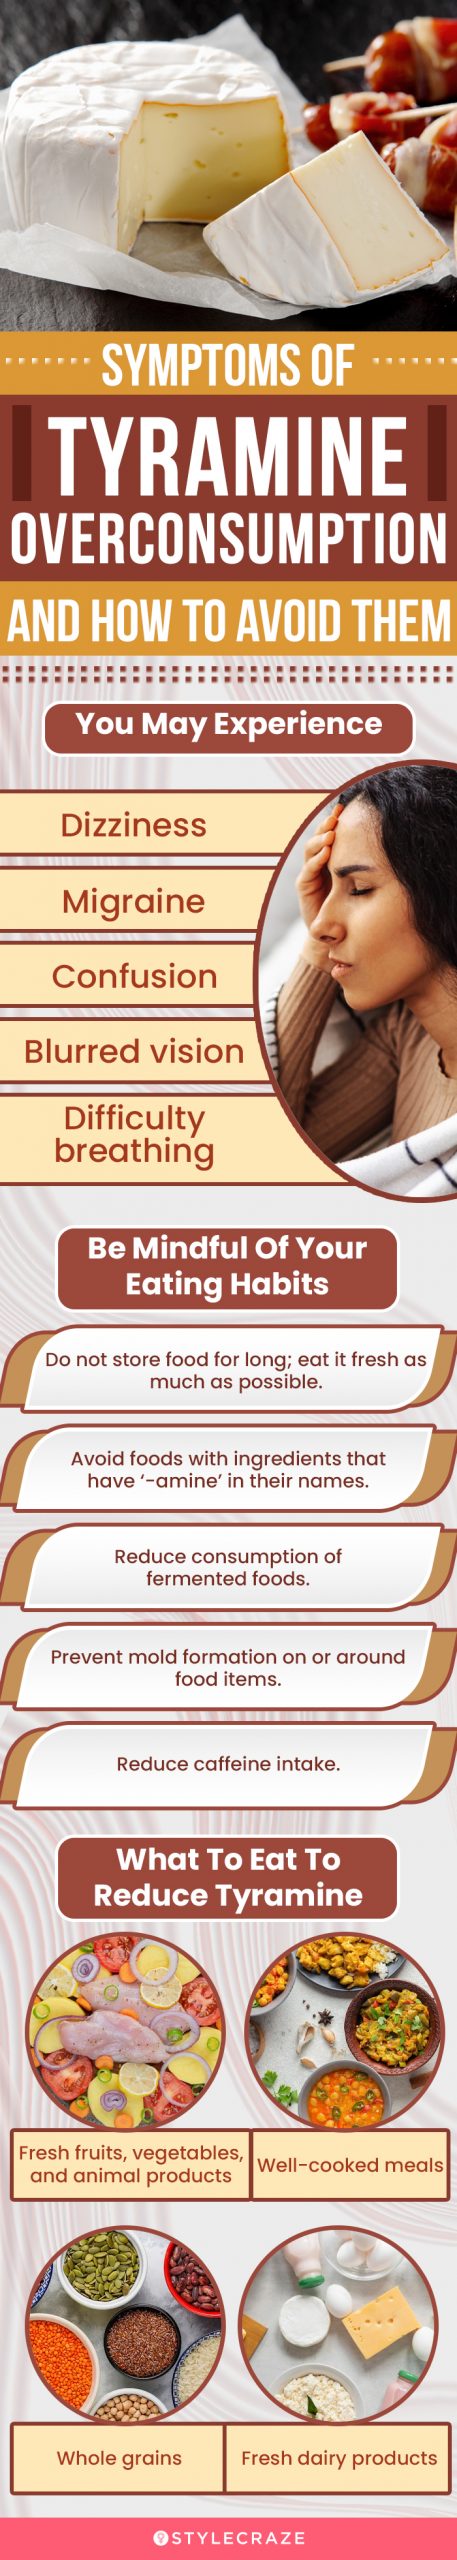 symptoms of tyramine overconsumption and how to avoid them (infographic)